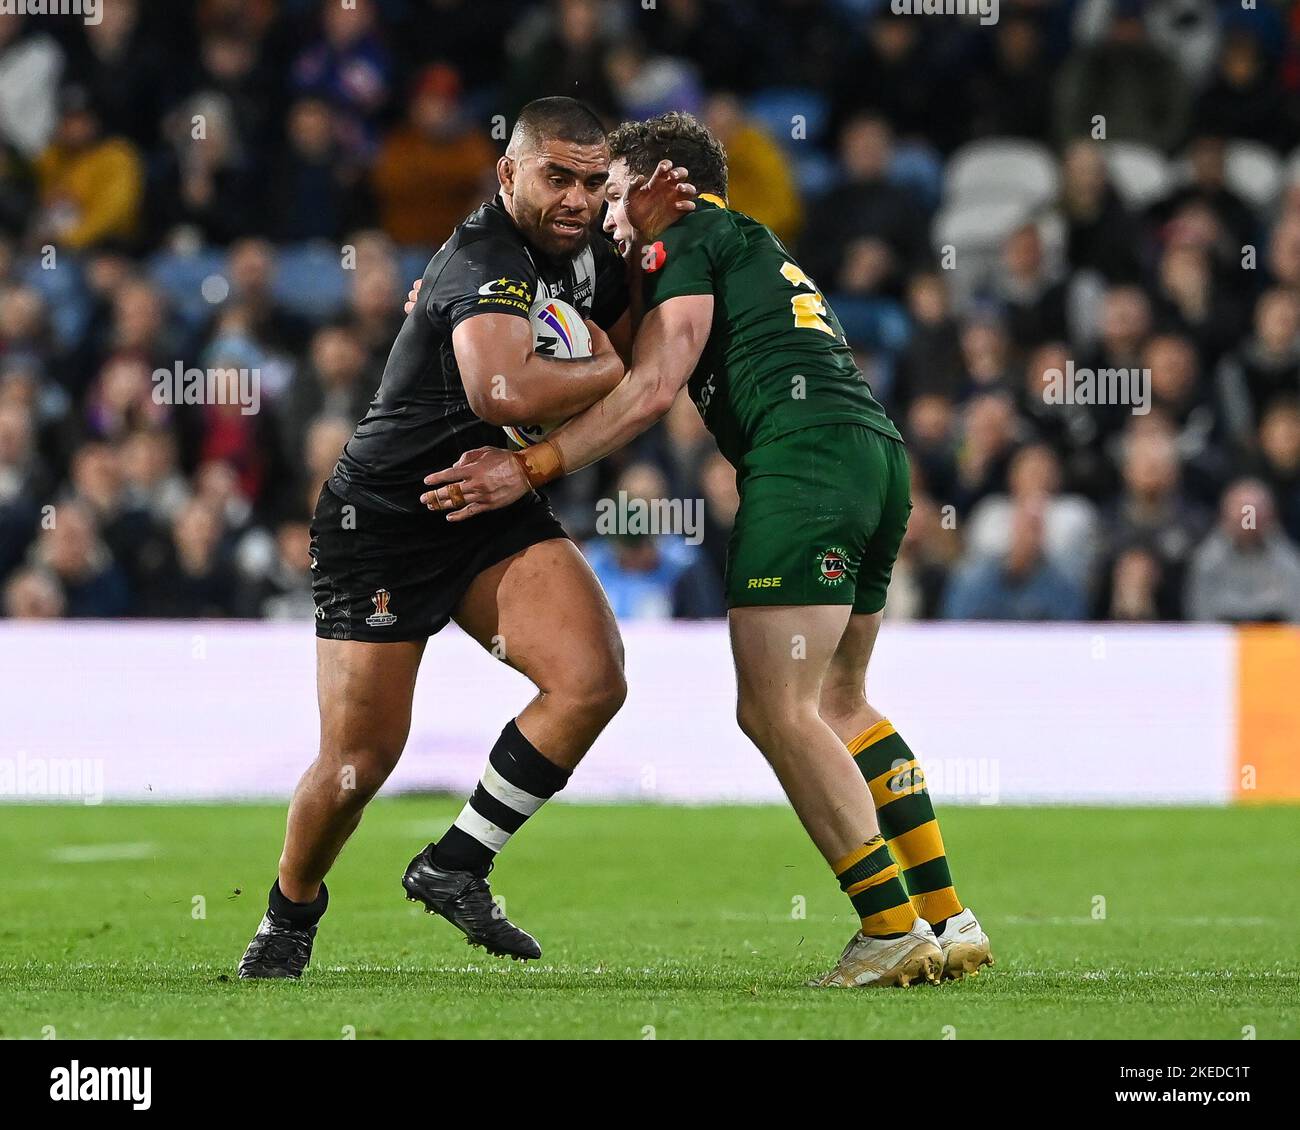 Isaiah Papalii of New Zealand is tackled by Liam Martin of Australia during the Rugby League World Cup 2021 Semi Final match Australia vs New Zealand at Elland Road, Leeds, United Kingdom,